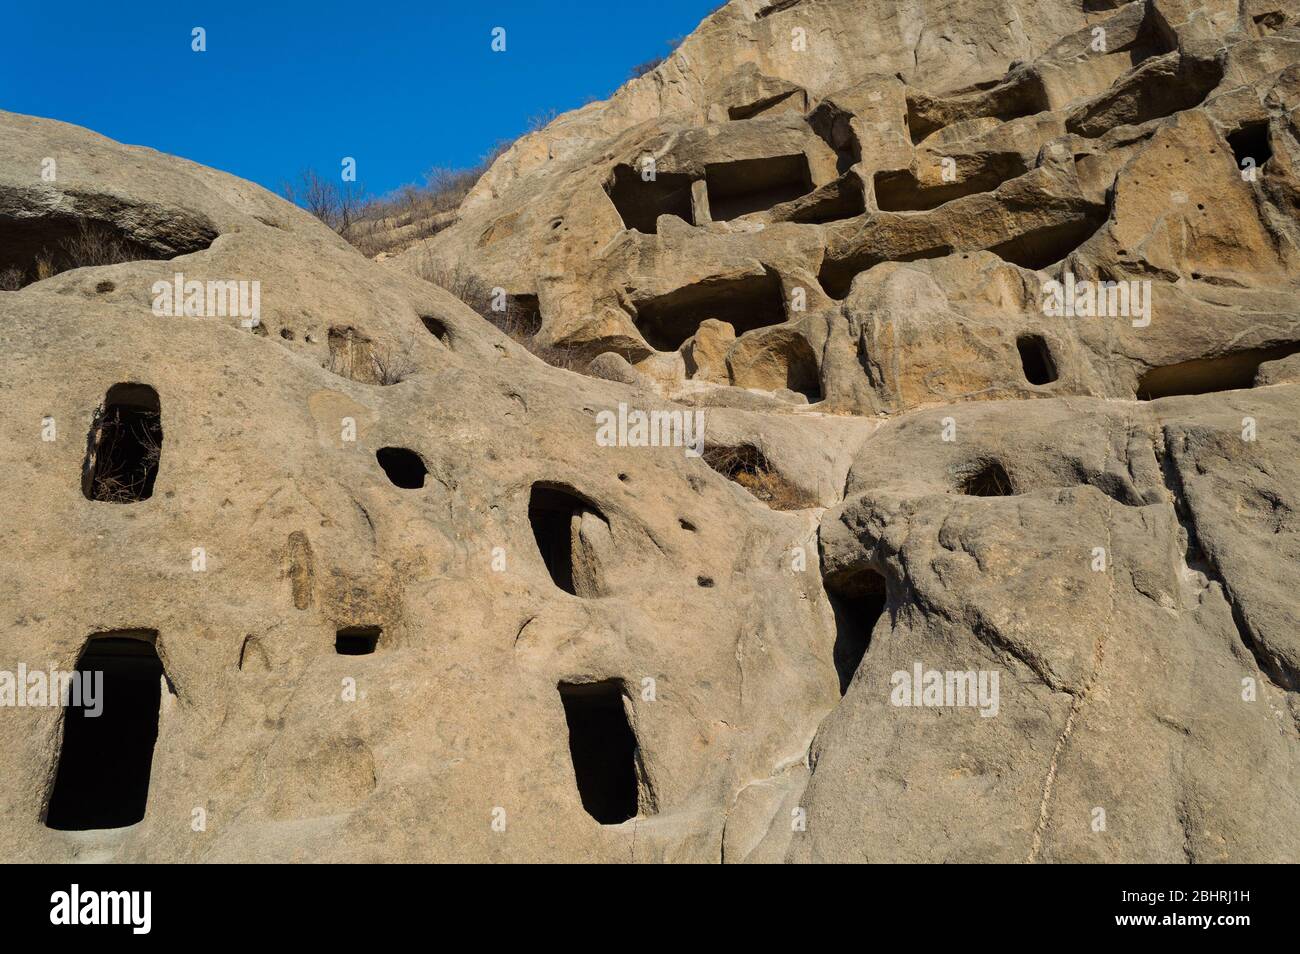 Ancient Cliff Dwellings of Guyaju Caves in Yanqing County, Hebei Province, about 80 kilometers northwest of Beijing, largest site of an ancient cave r Stock Photo